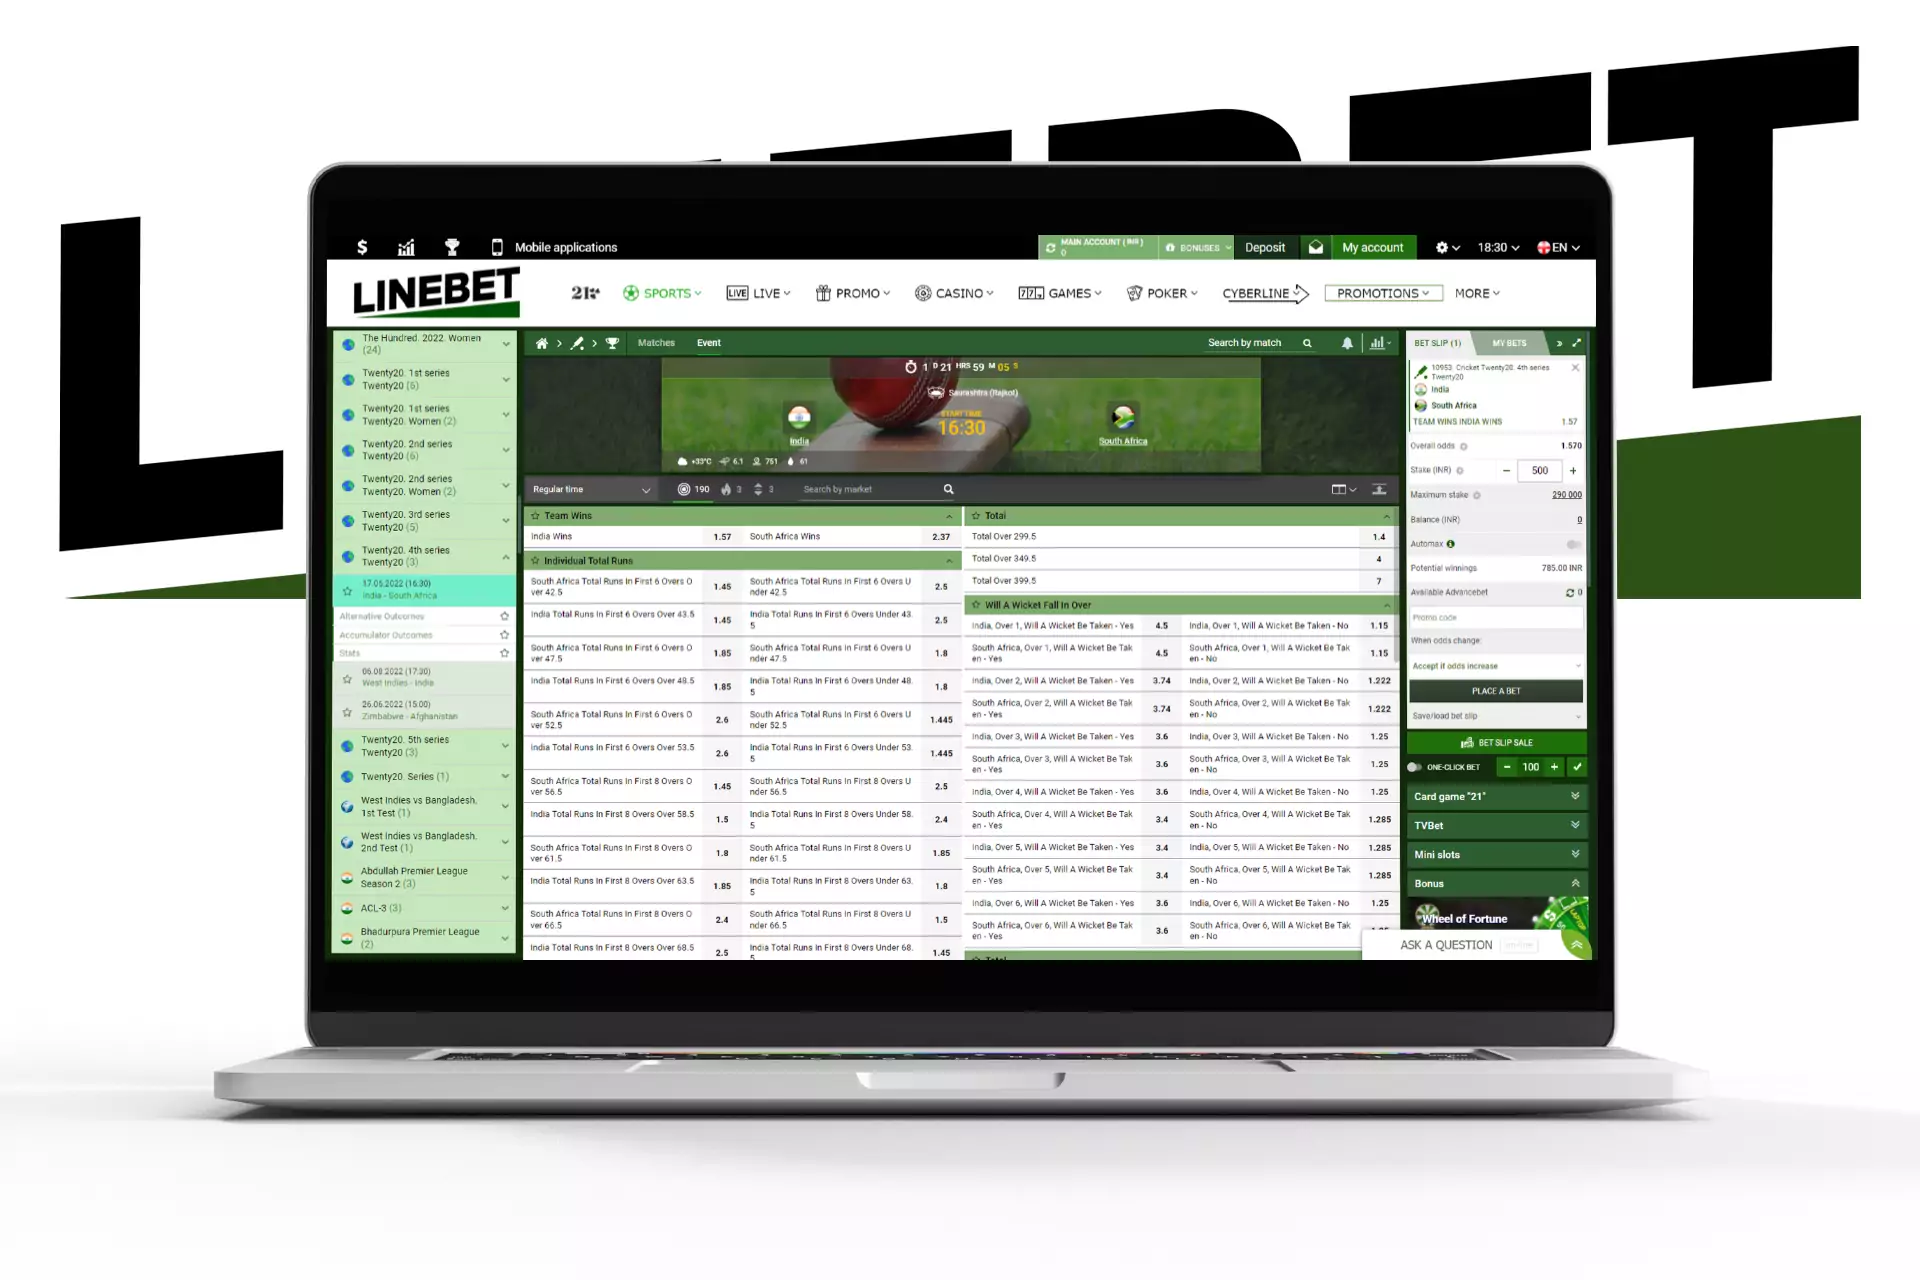 Before betting, think of the types of bets the Linebet suggests to users.